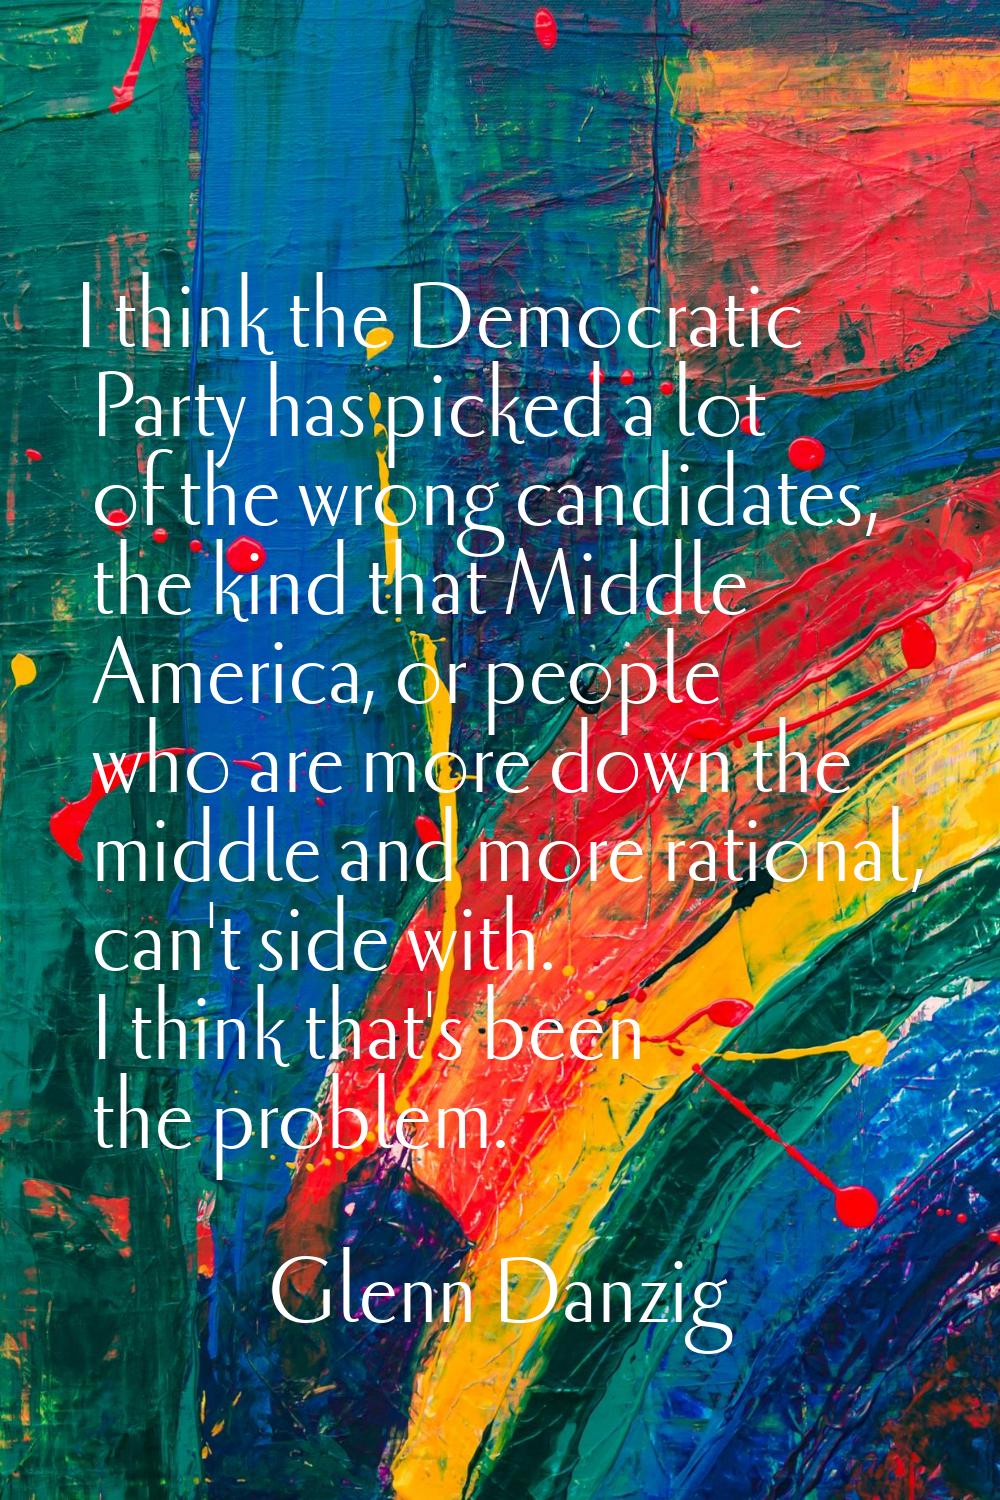 I think the Democratic Party has picked a lot of the wrong candidates, the kind that Middle America